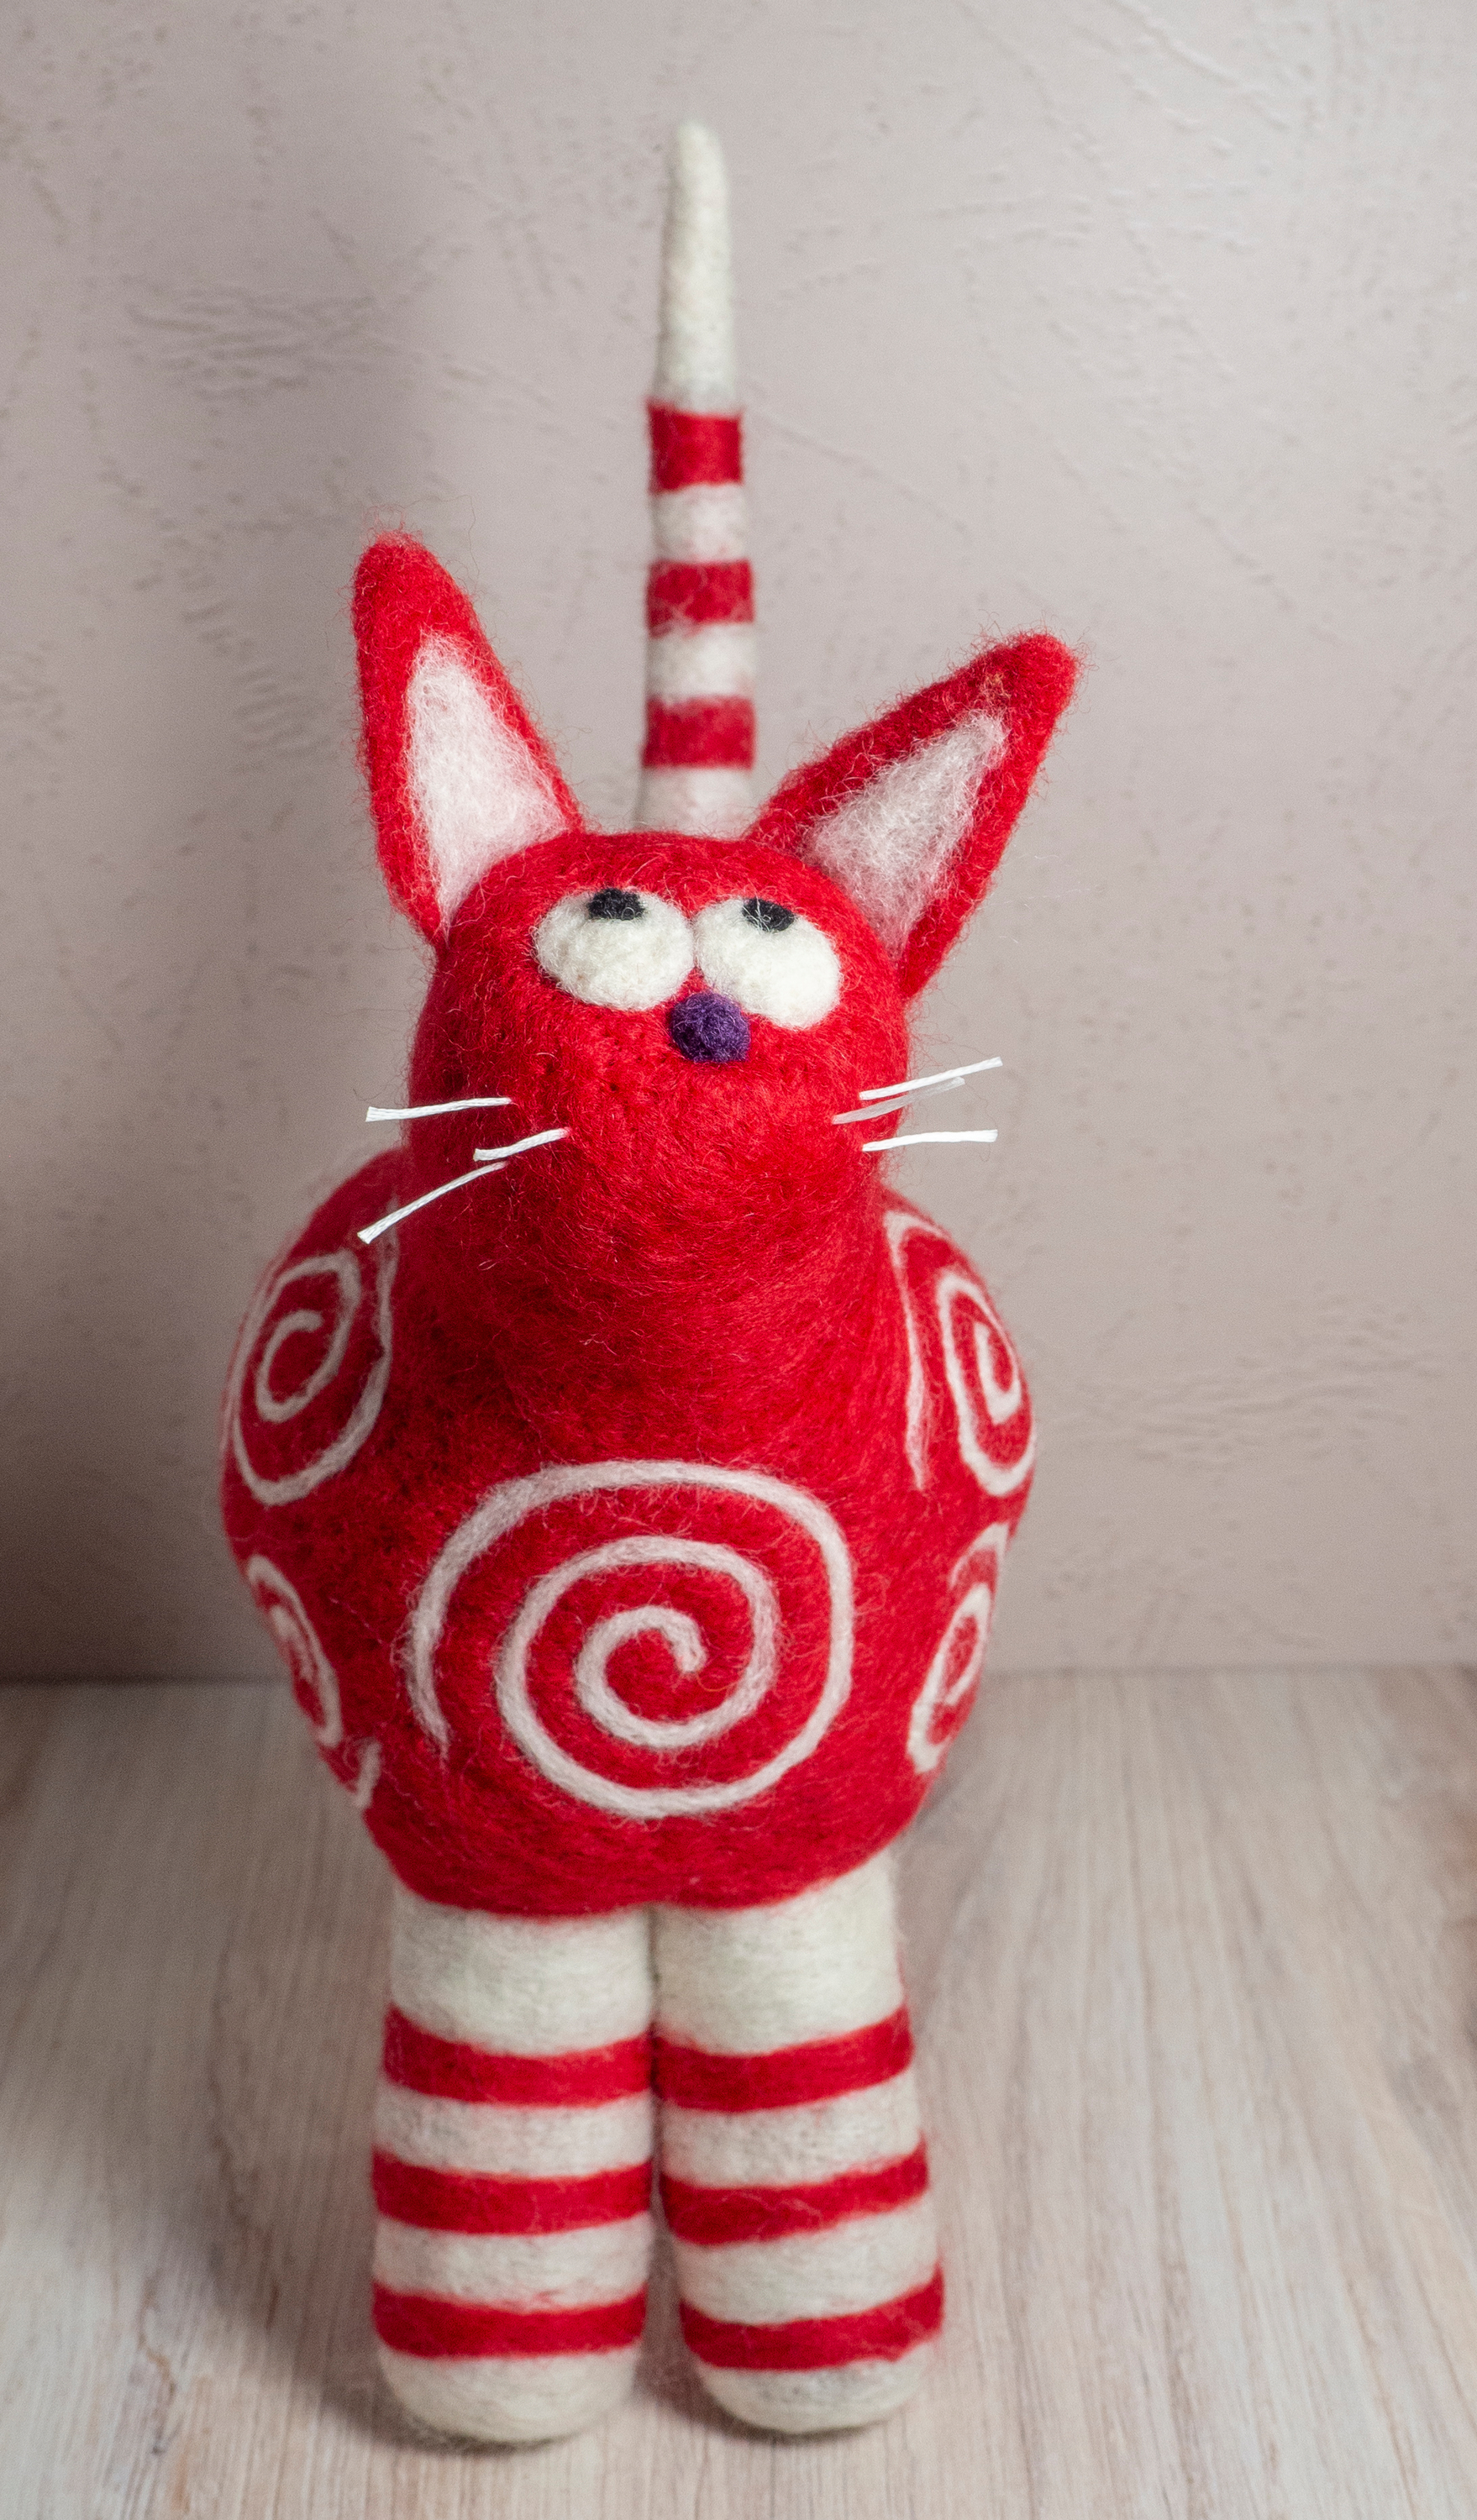 Red and white swirl cat fbccbn